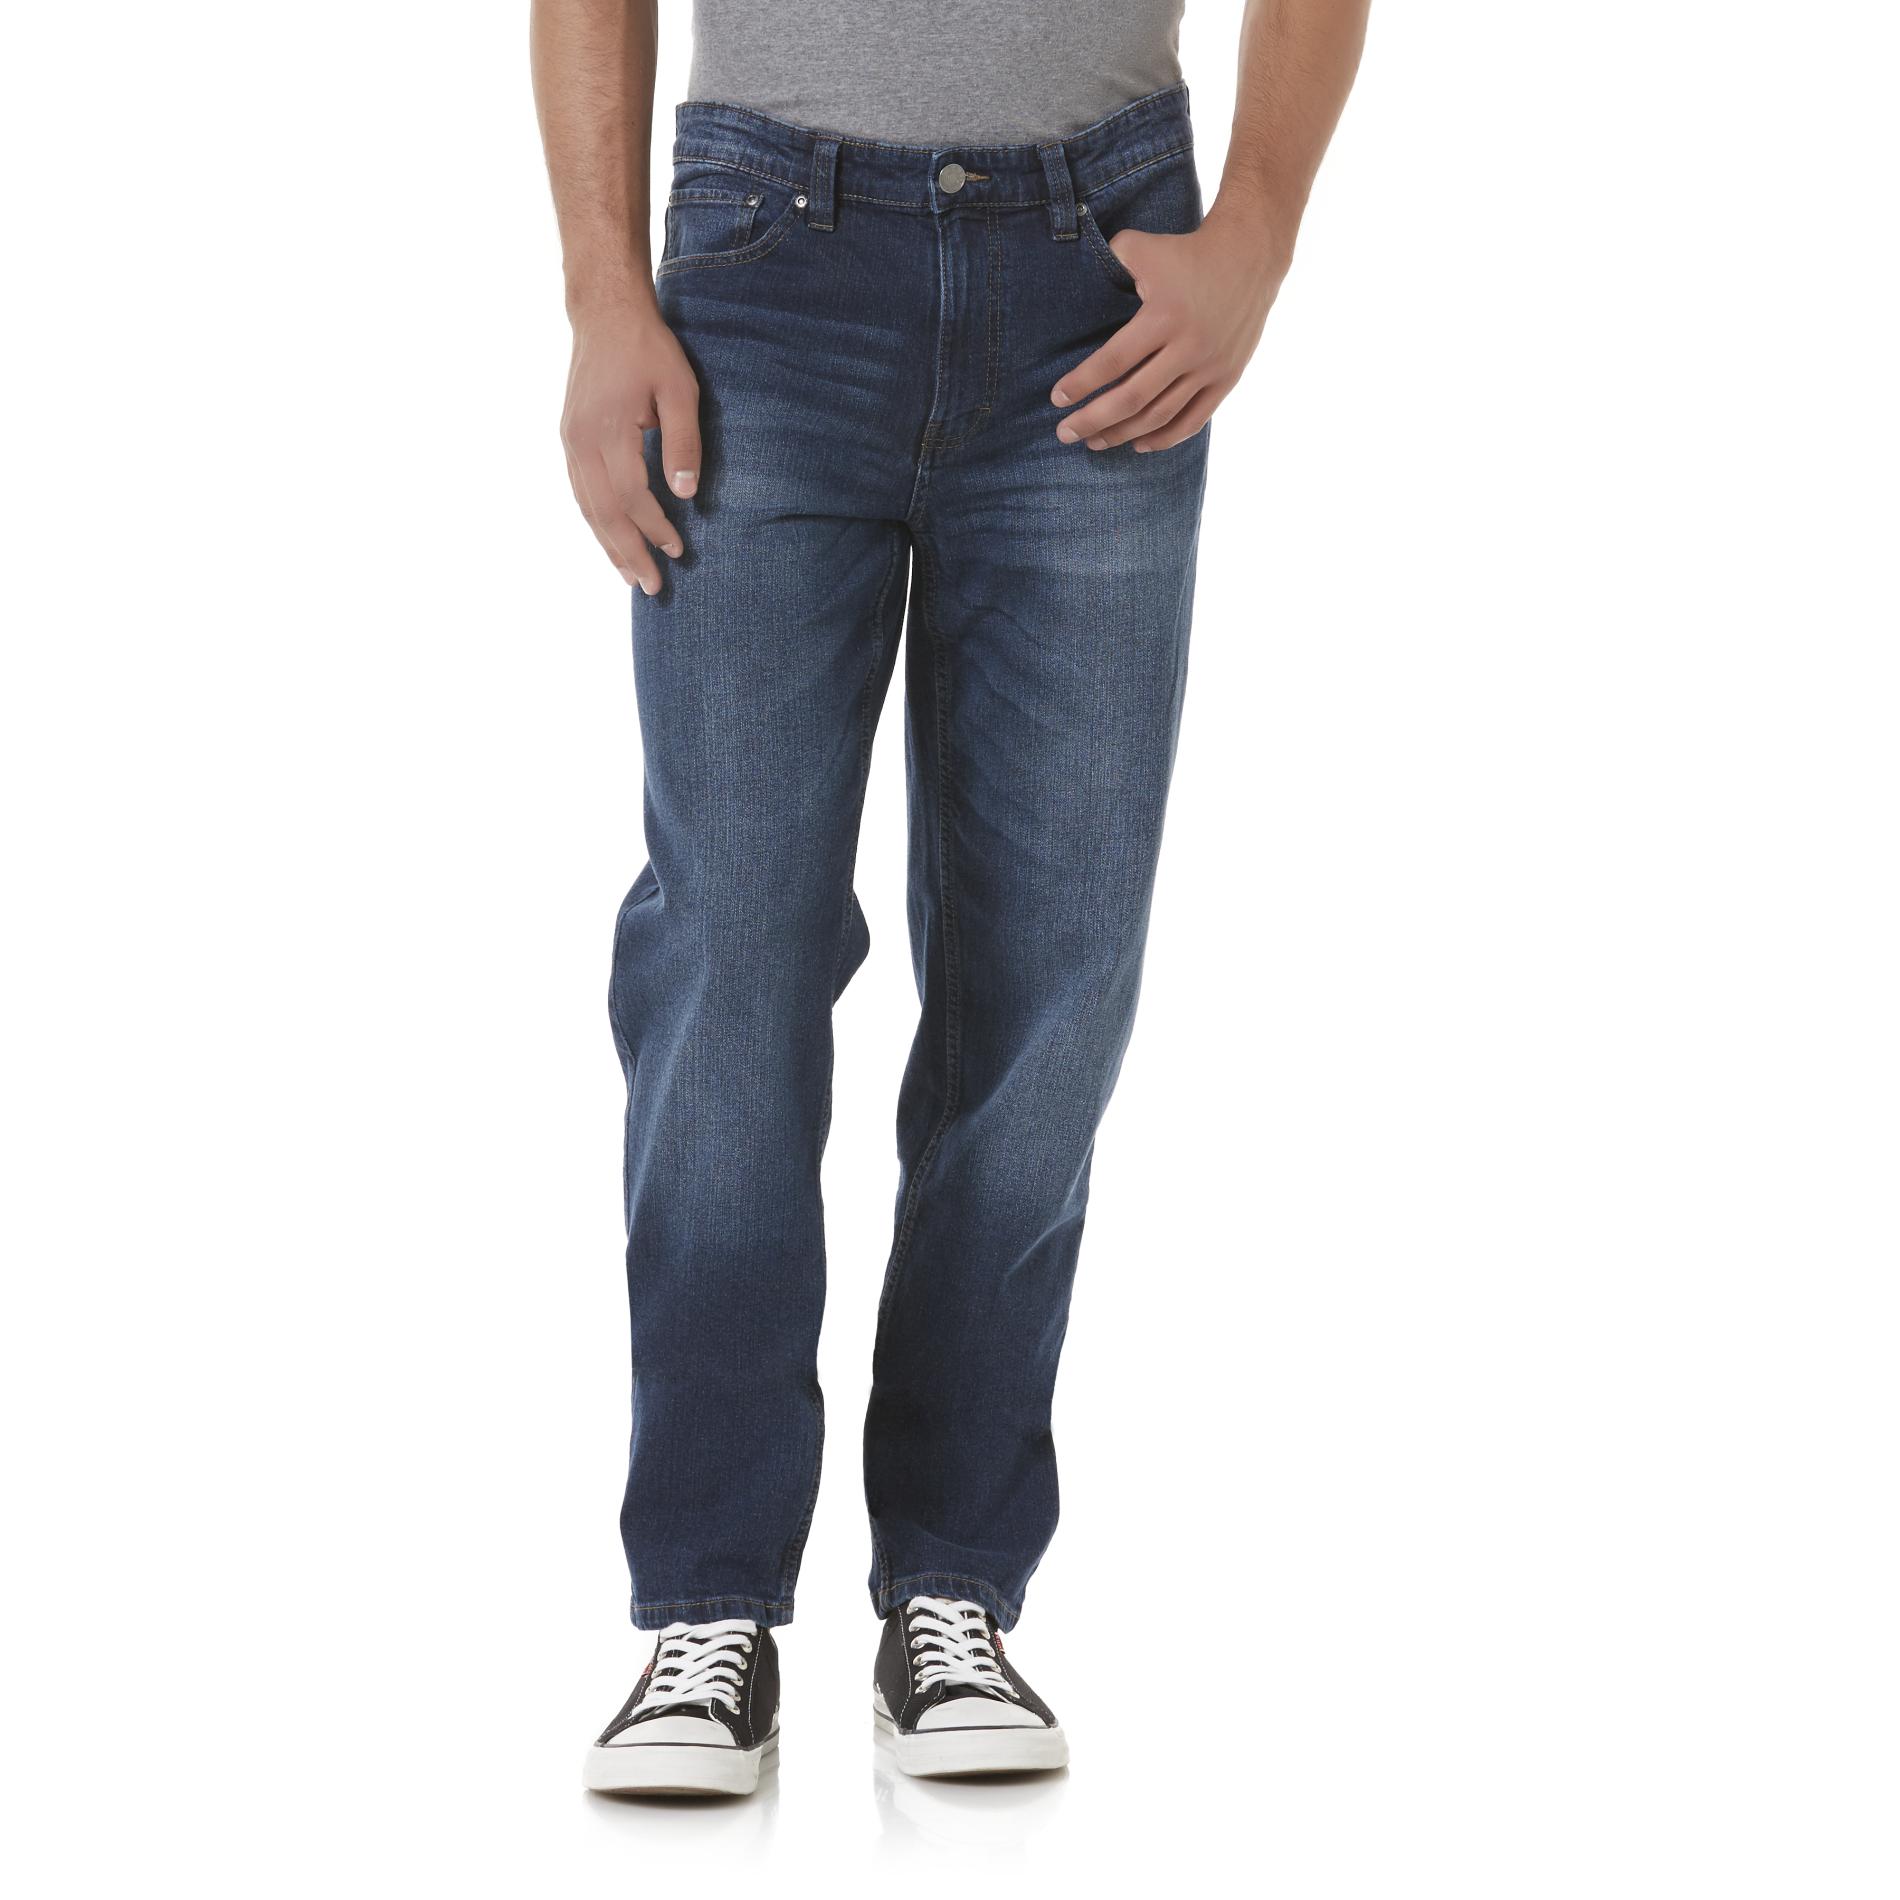 Basic Editions Men's Stretch Comfort Jeans | Shop Your Way: Online ...